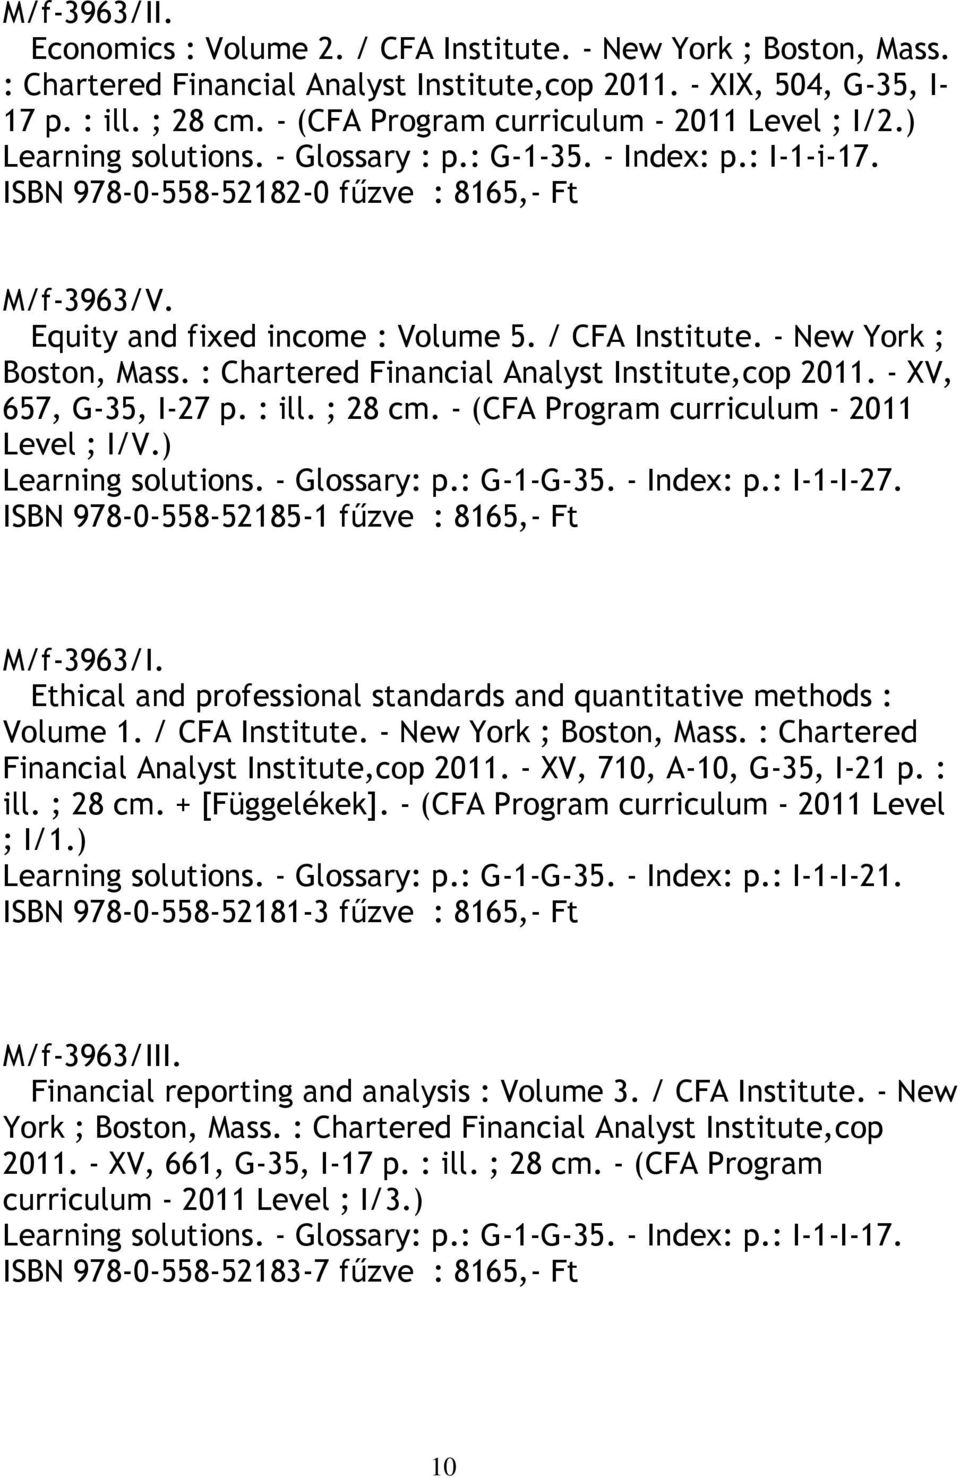 Equity and fixed income : Volume 5. / CFA Institute. - New York ; Boston, Mass. : Chartered Financial Analyst Institute,cop 2011. - XV, 657, G-35, I-27 p. : ill. ; 28 cm.